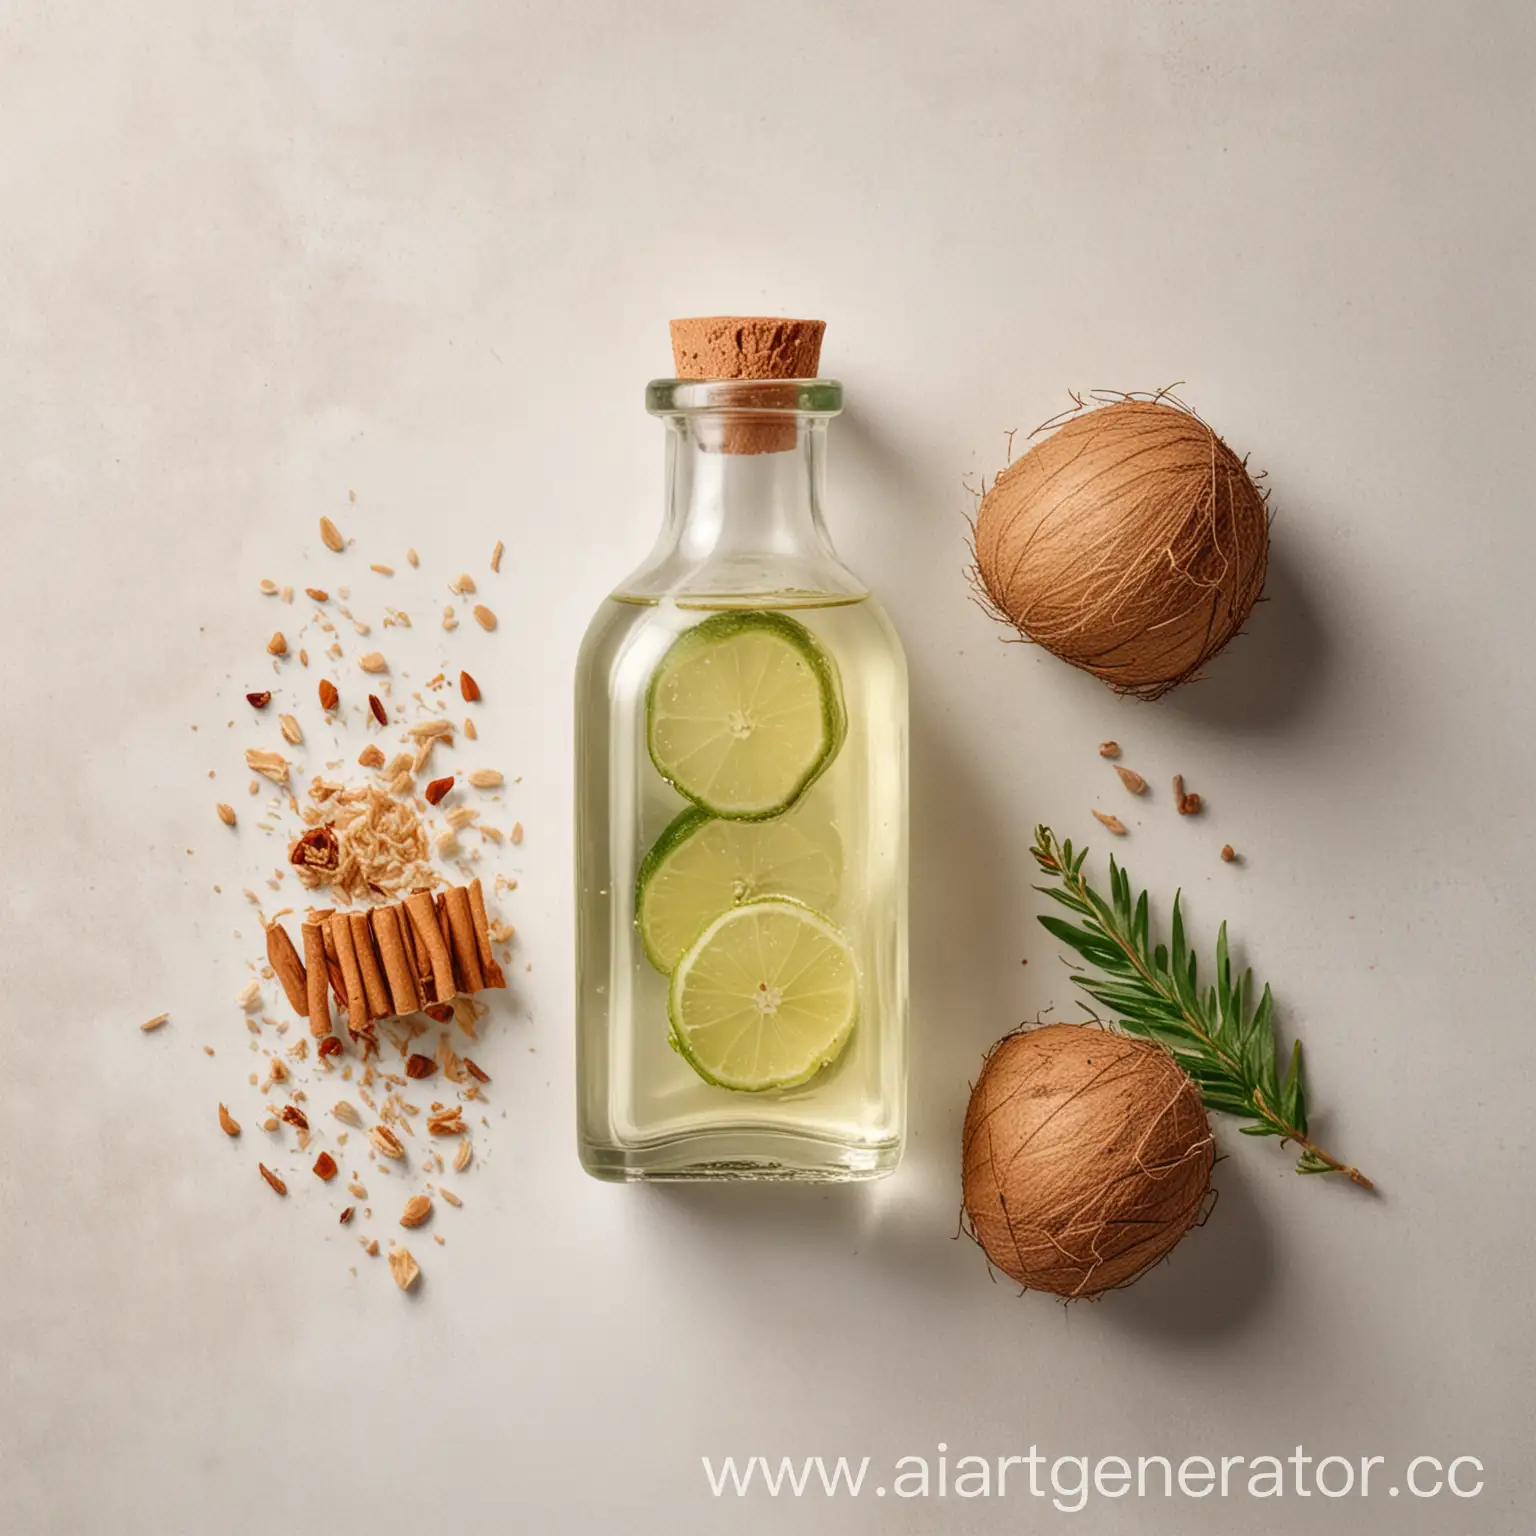 Aromatic-Coconut-Lime-Ginger-and-Cedar-Essence-in-a-Transparent-Bottle-on-White-Background